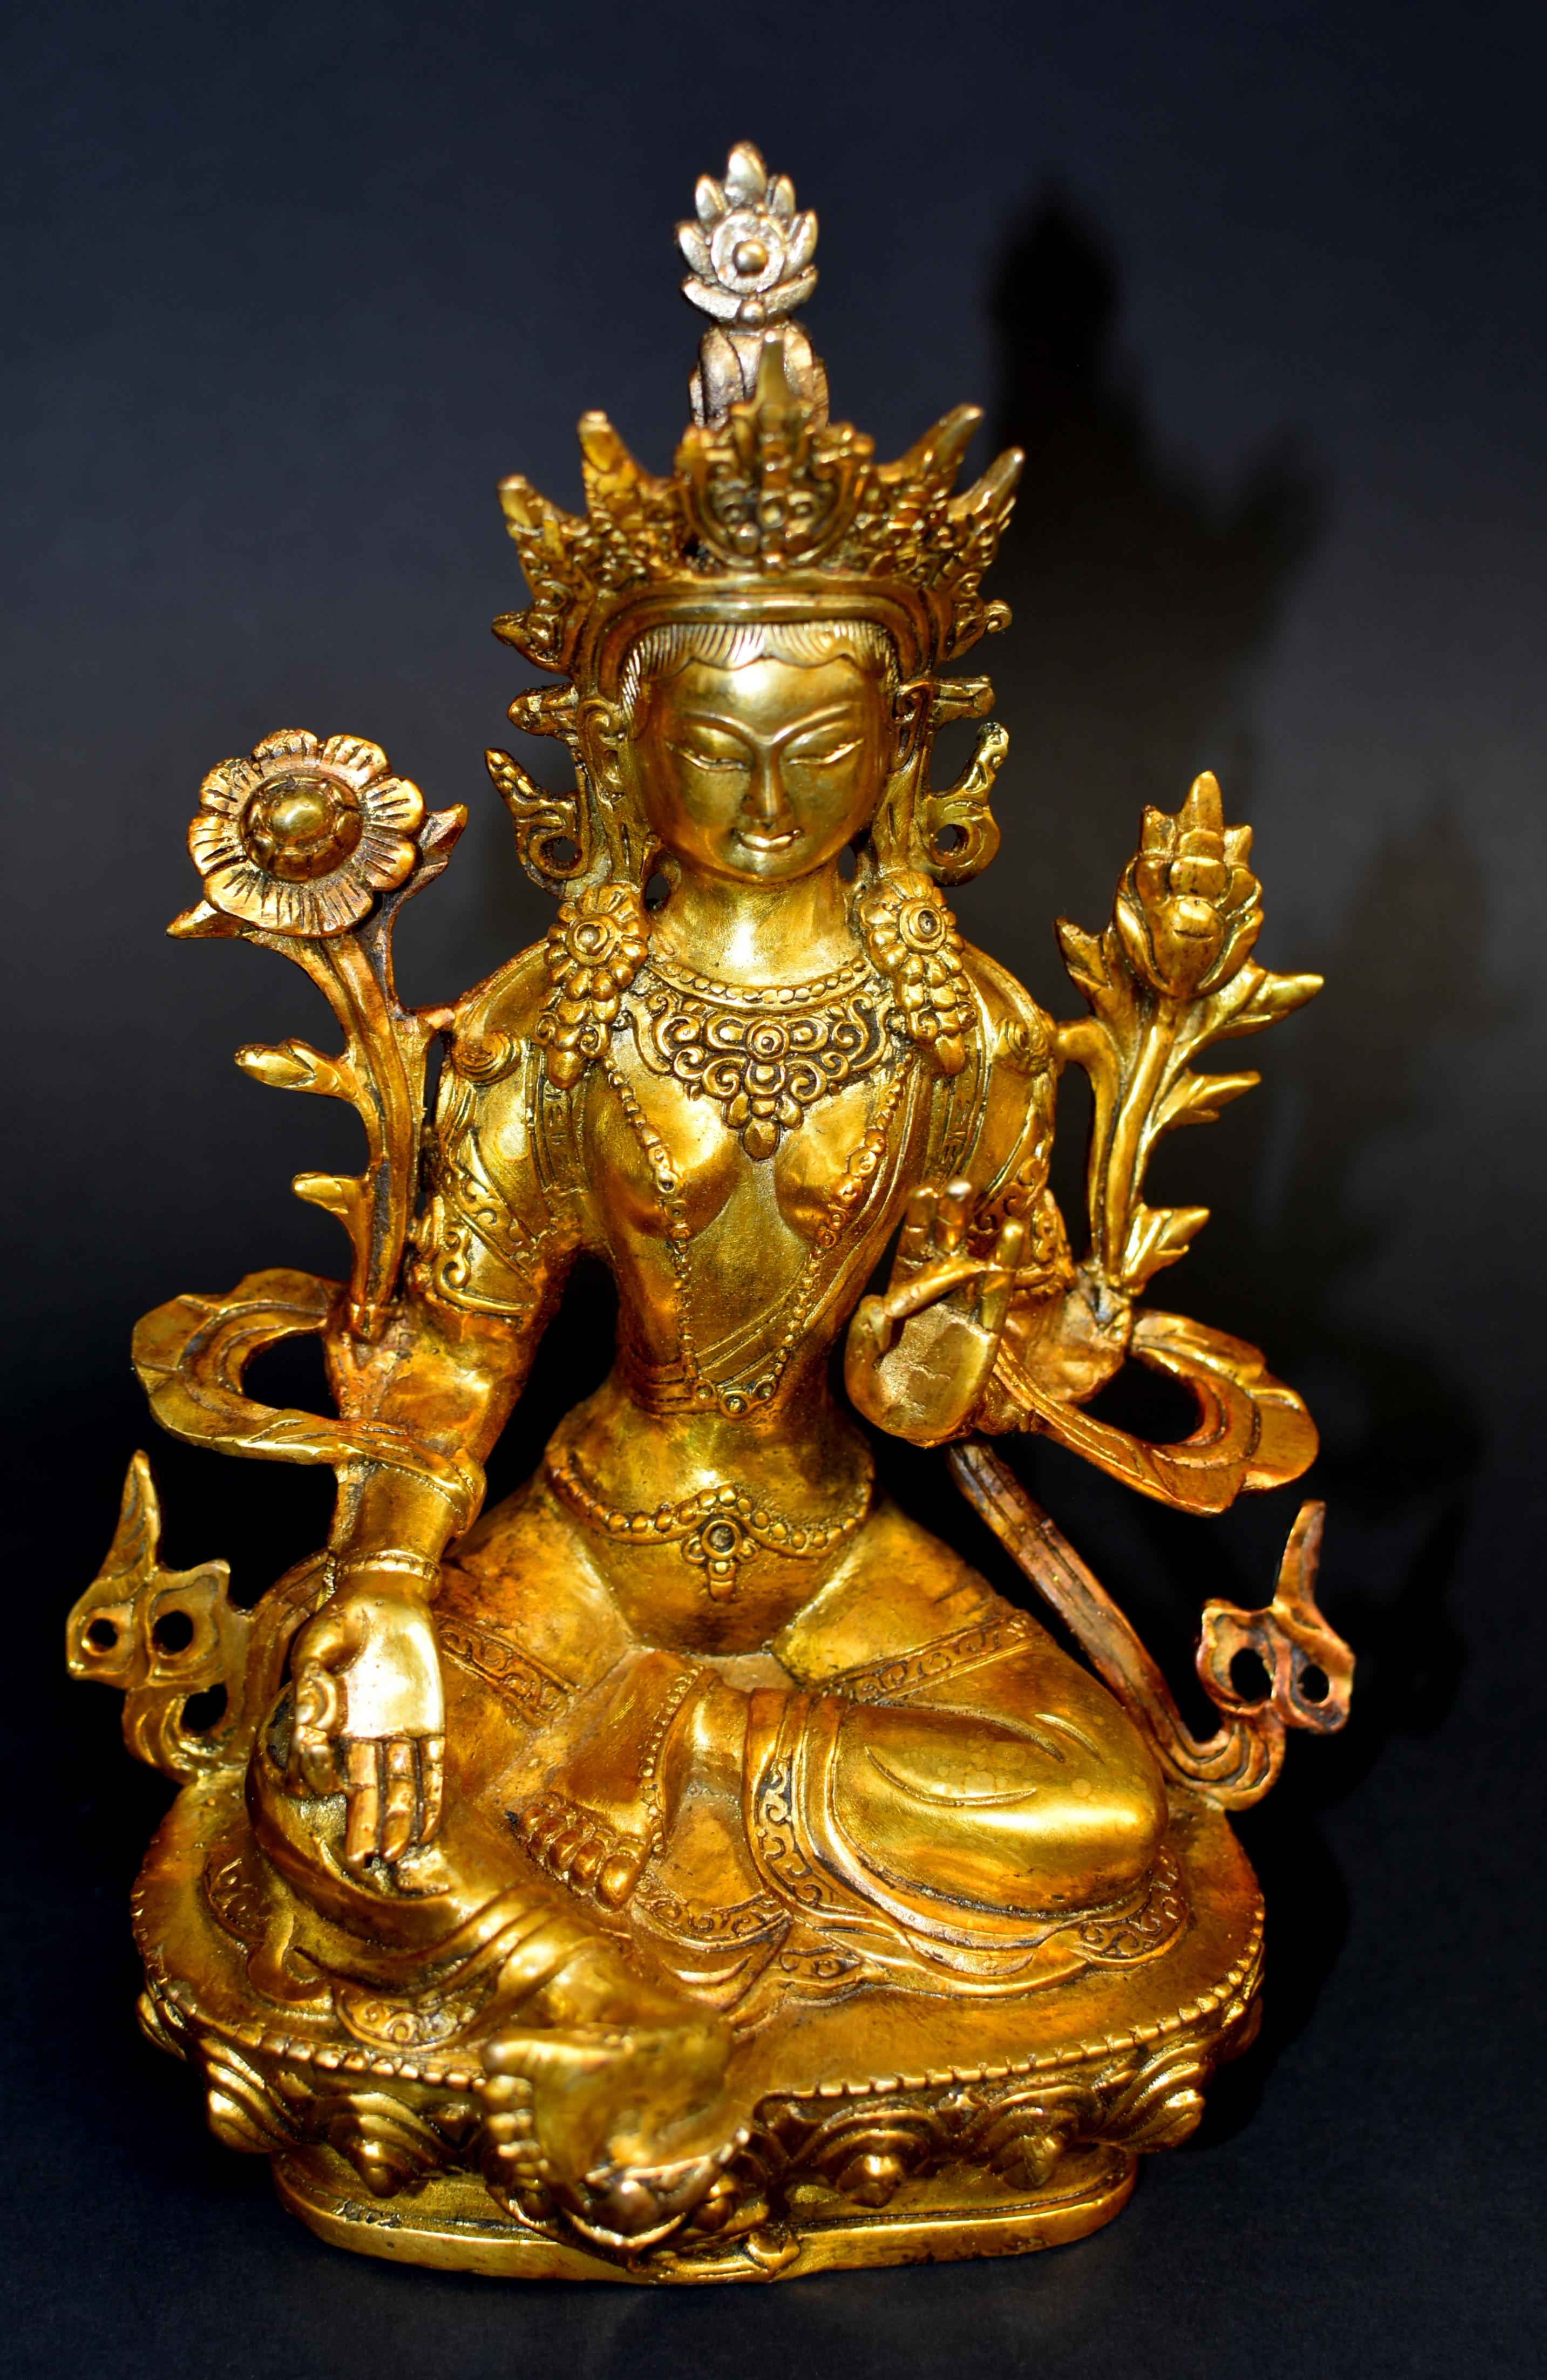 A stunning gilt bronze statue of Avalokiteshvara, the Great Compassion Green Tara. Seated in lalitasana with the right foot supported on a lotus stem that projects from the front of the double-lotus base. The hands are held in vitarkamudra with the